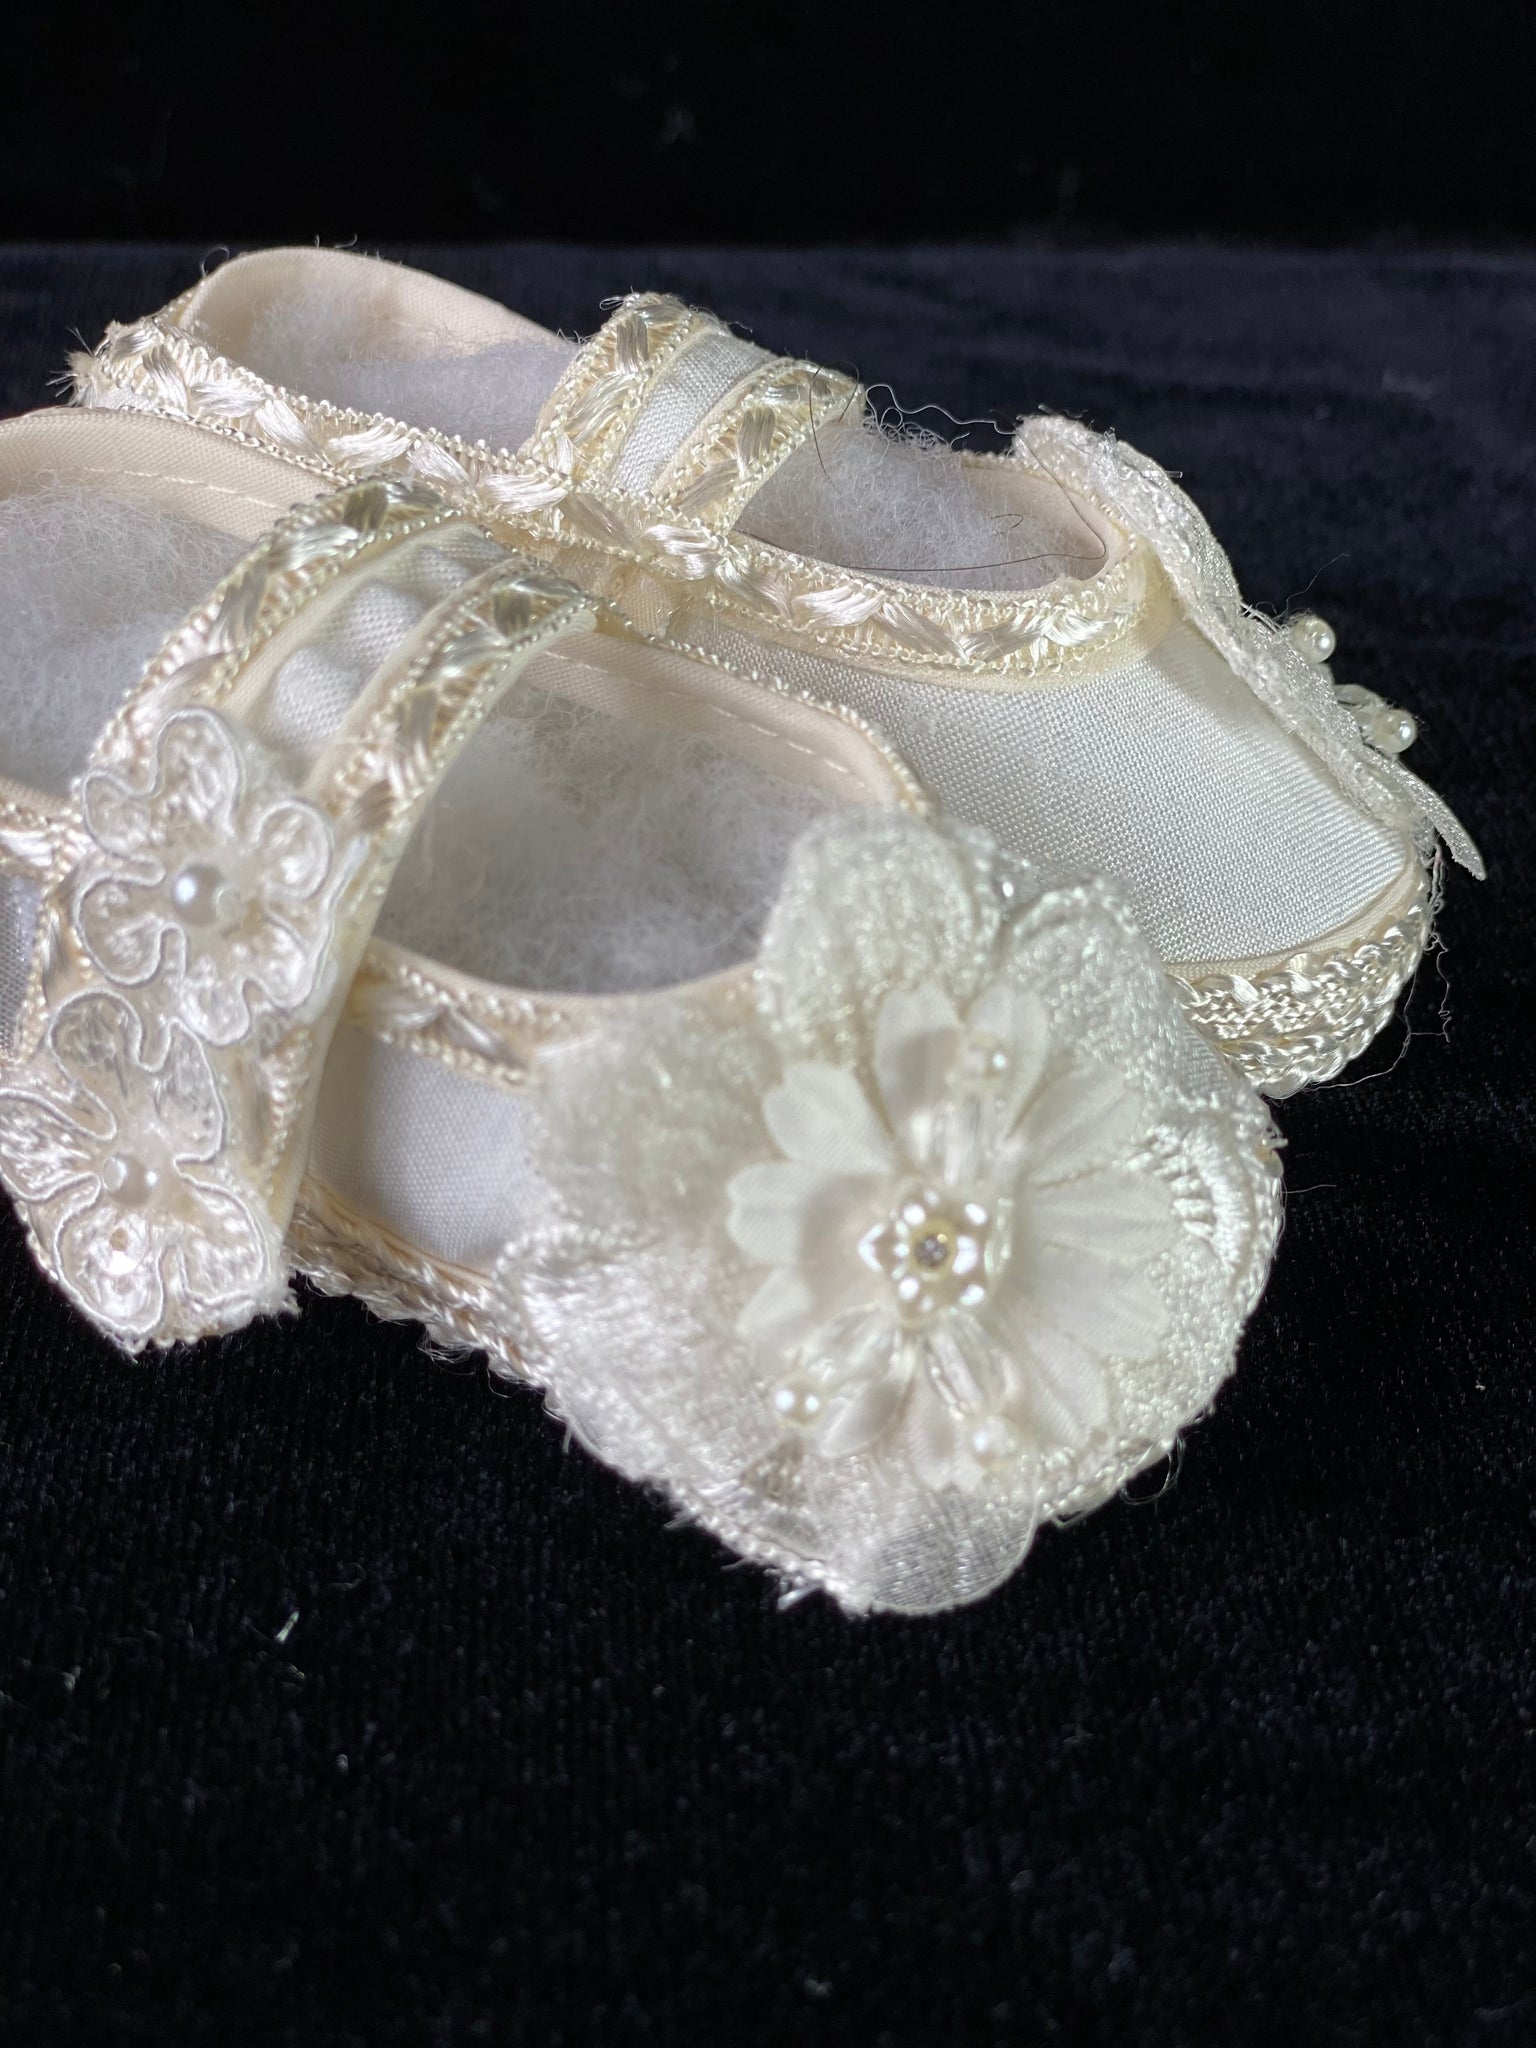 Elegant handmade ivory baby girl shoes with embroidery, lace, flowers, and pearls.